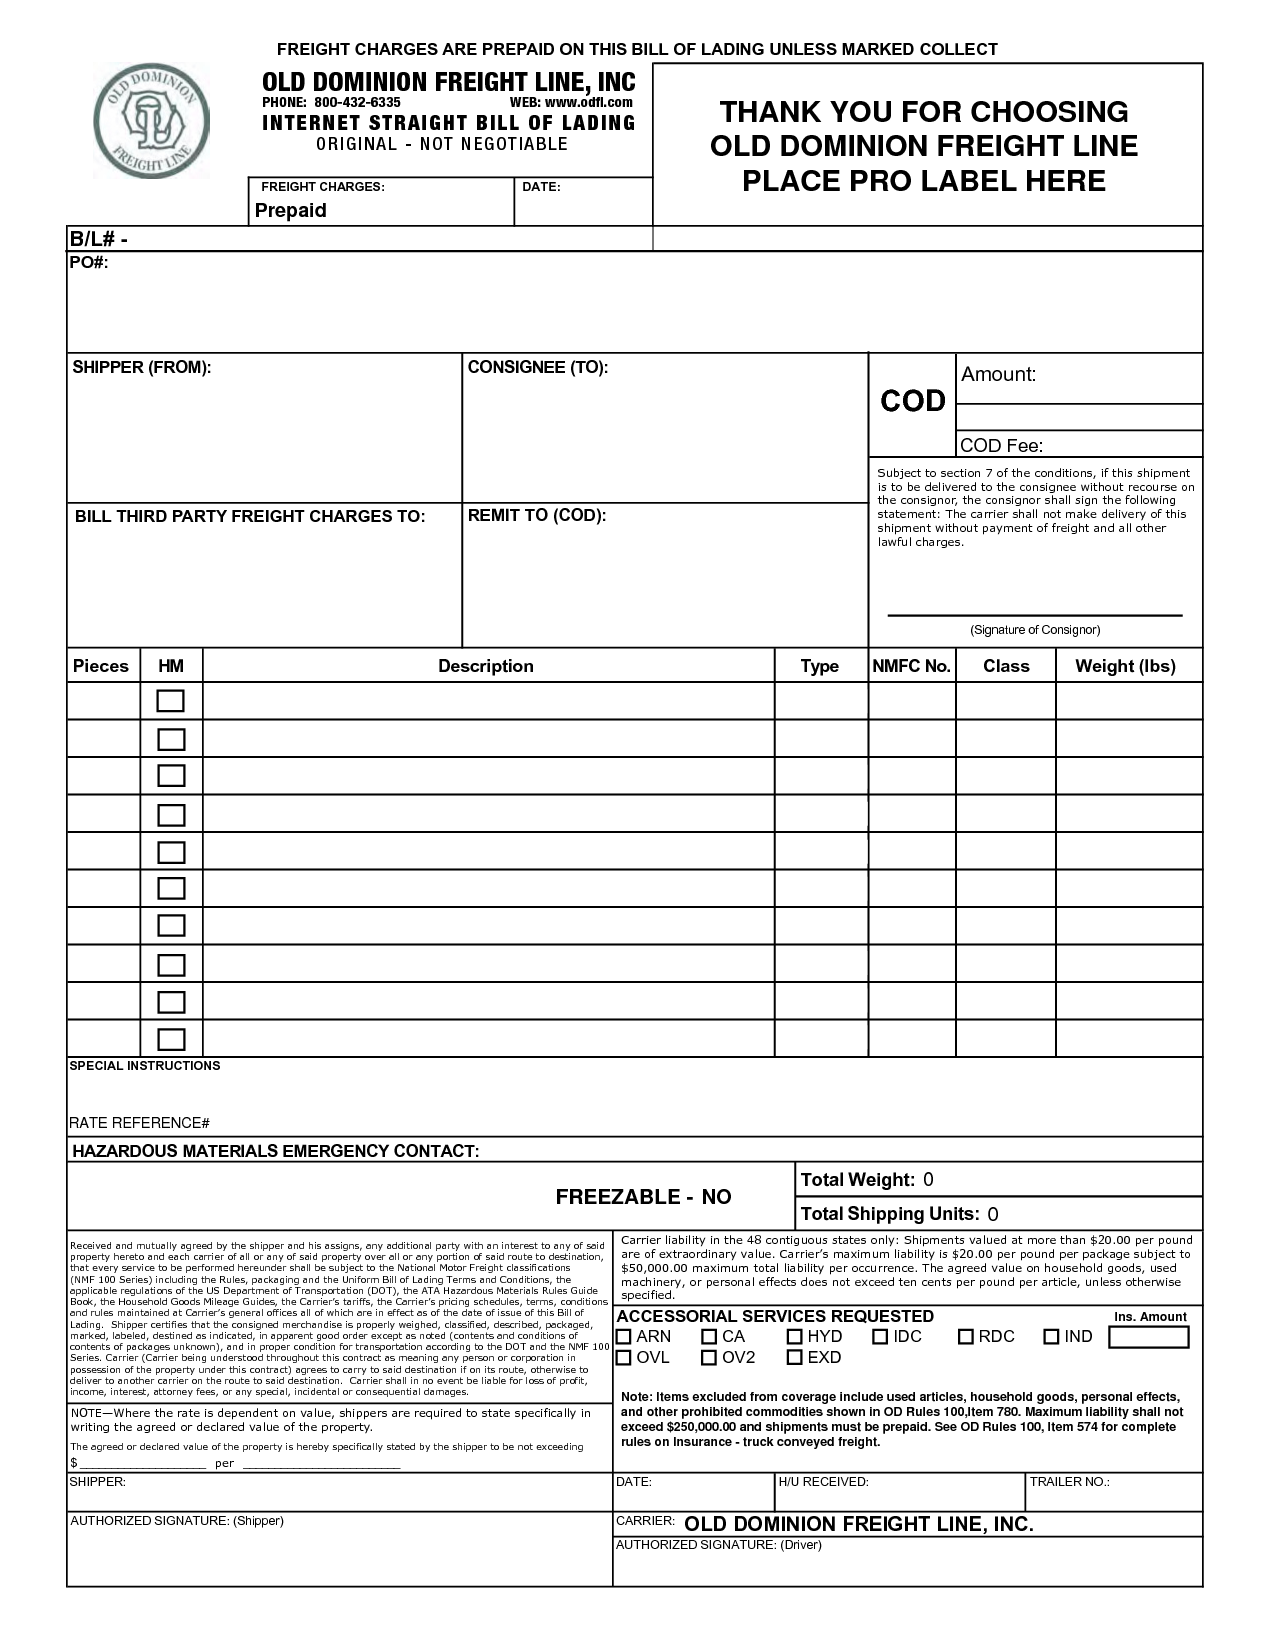 5 Best Images of Free Printable Blank Contract Forms - Blank Contract